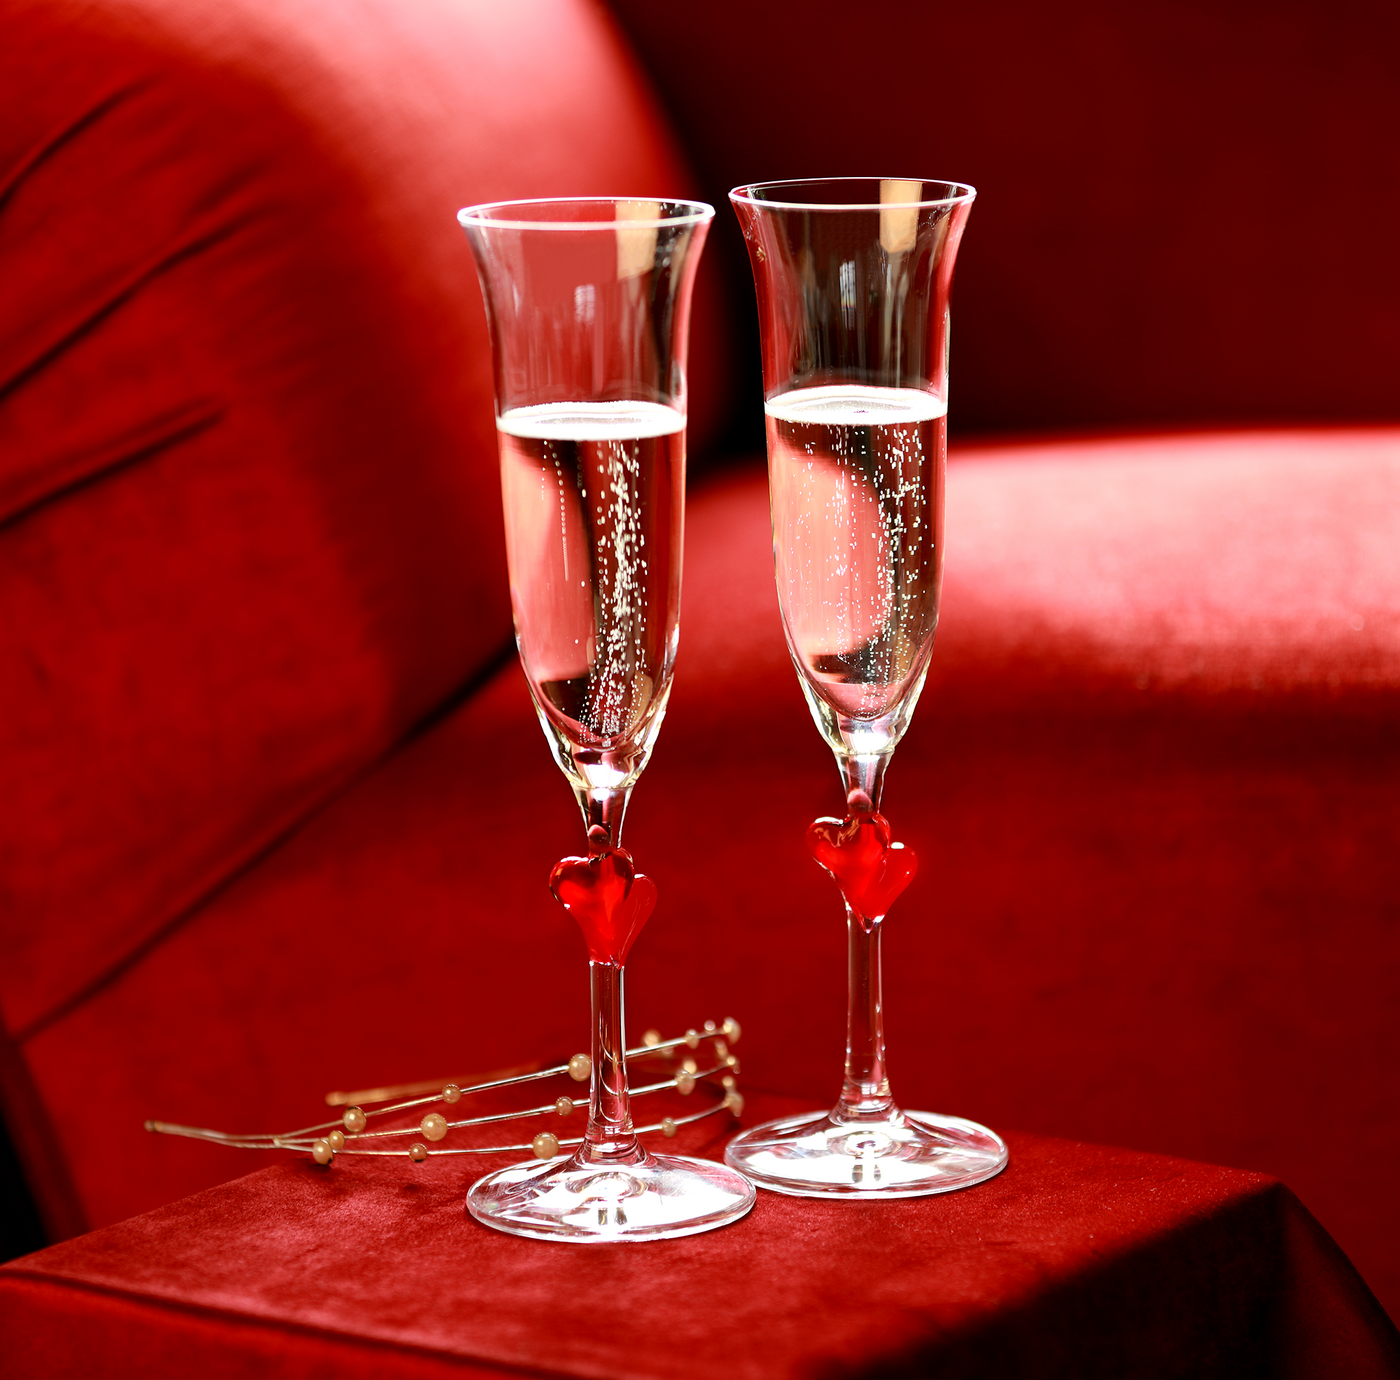 L'Amour Red Champagne Flute 6 oz - Set of two.